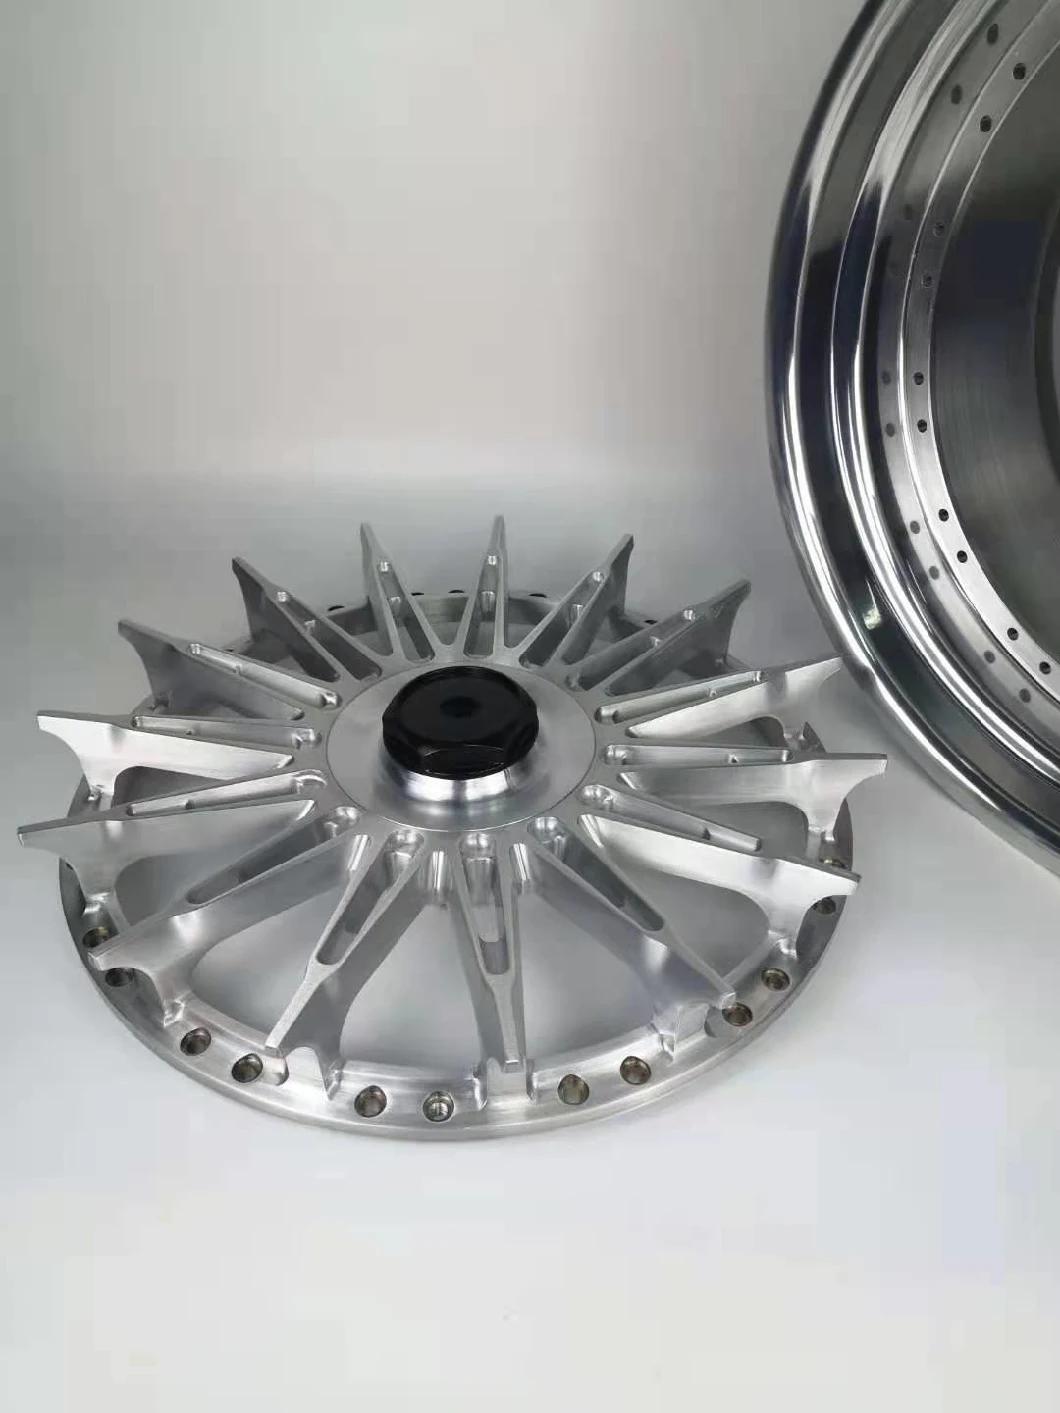 Racing The Car Rims 18 to 20 Inches 9.5 10.5 Casting Aluminum Alloy Wheel